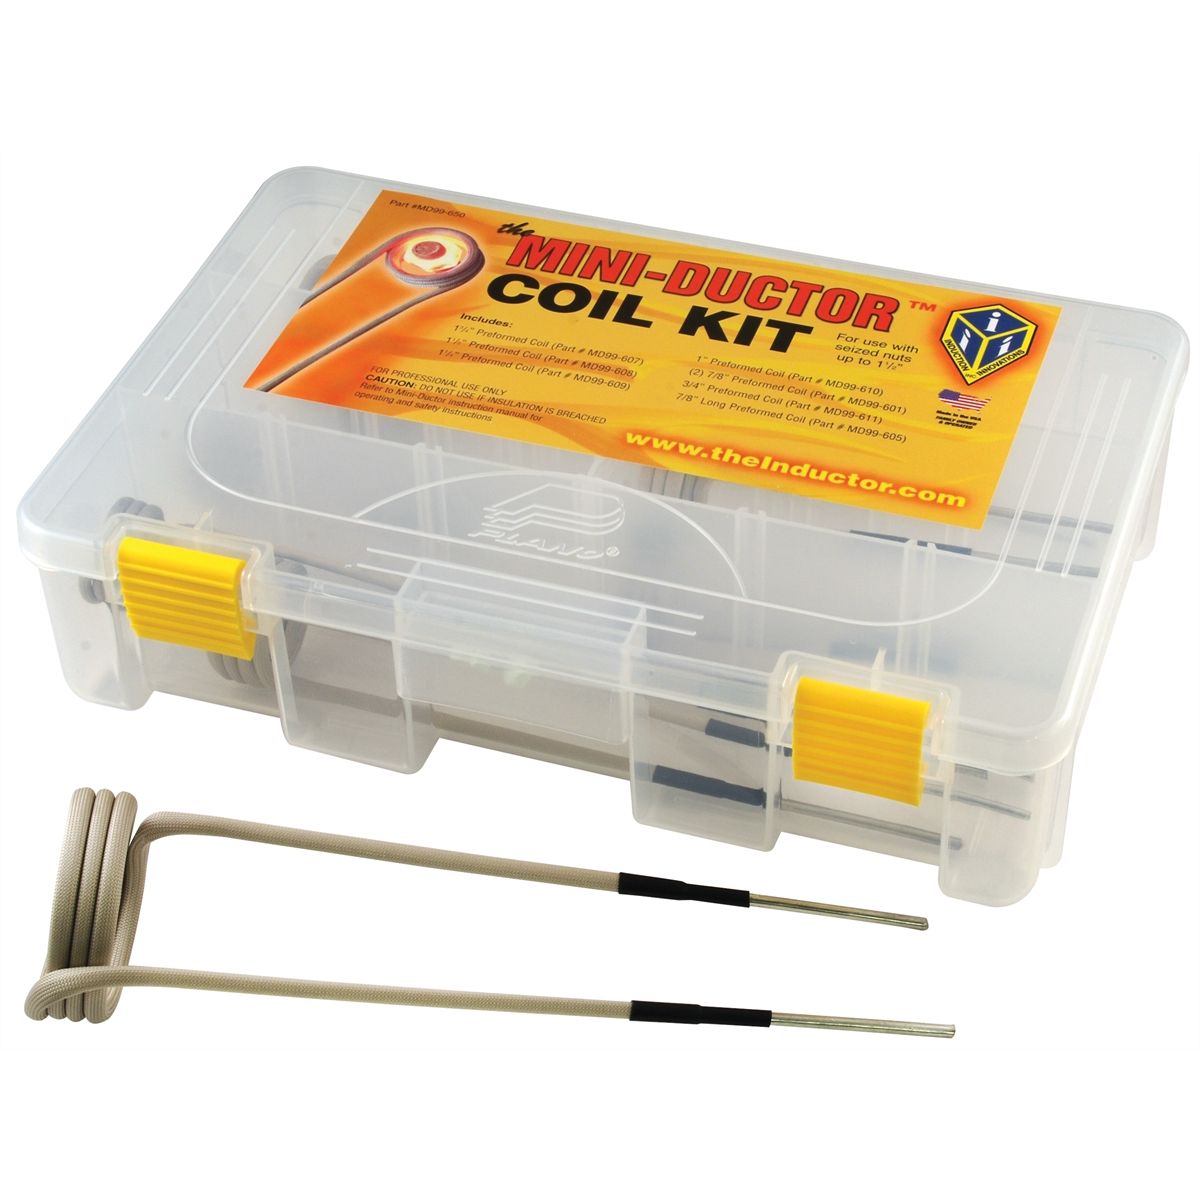 Mini-Ductor HP (MDV-787) and Master Coil kit (MD99...